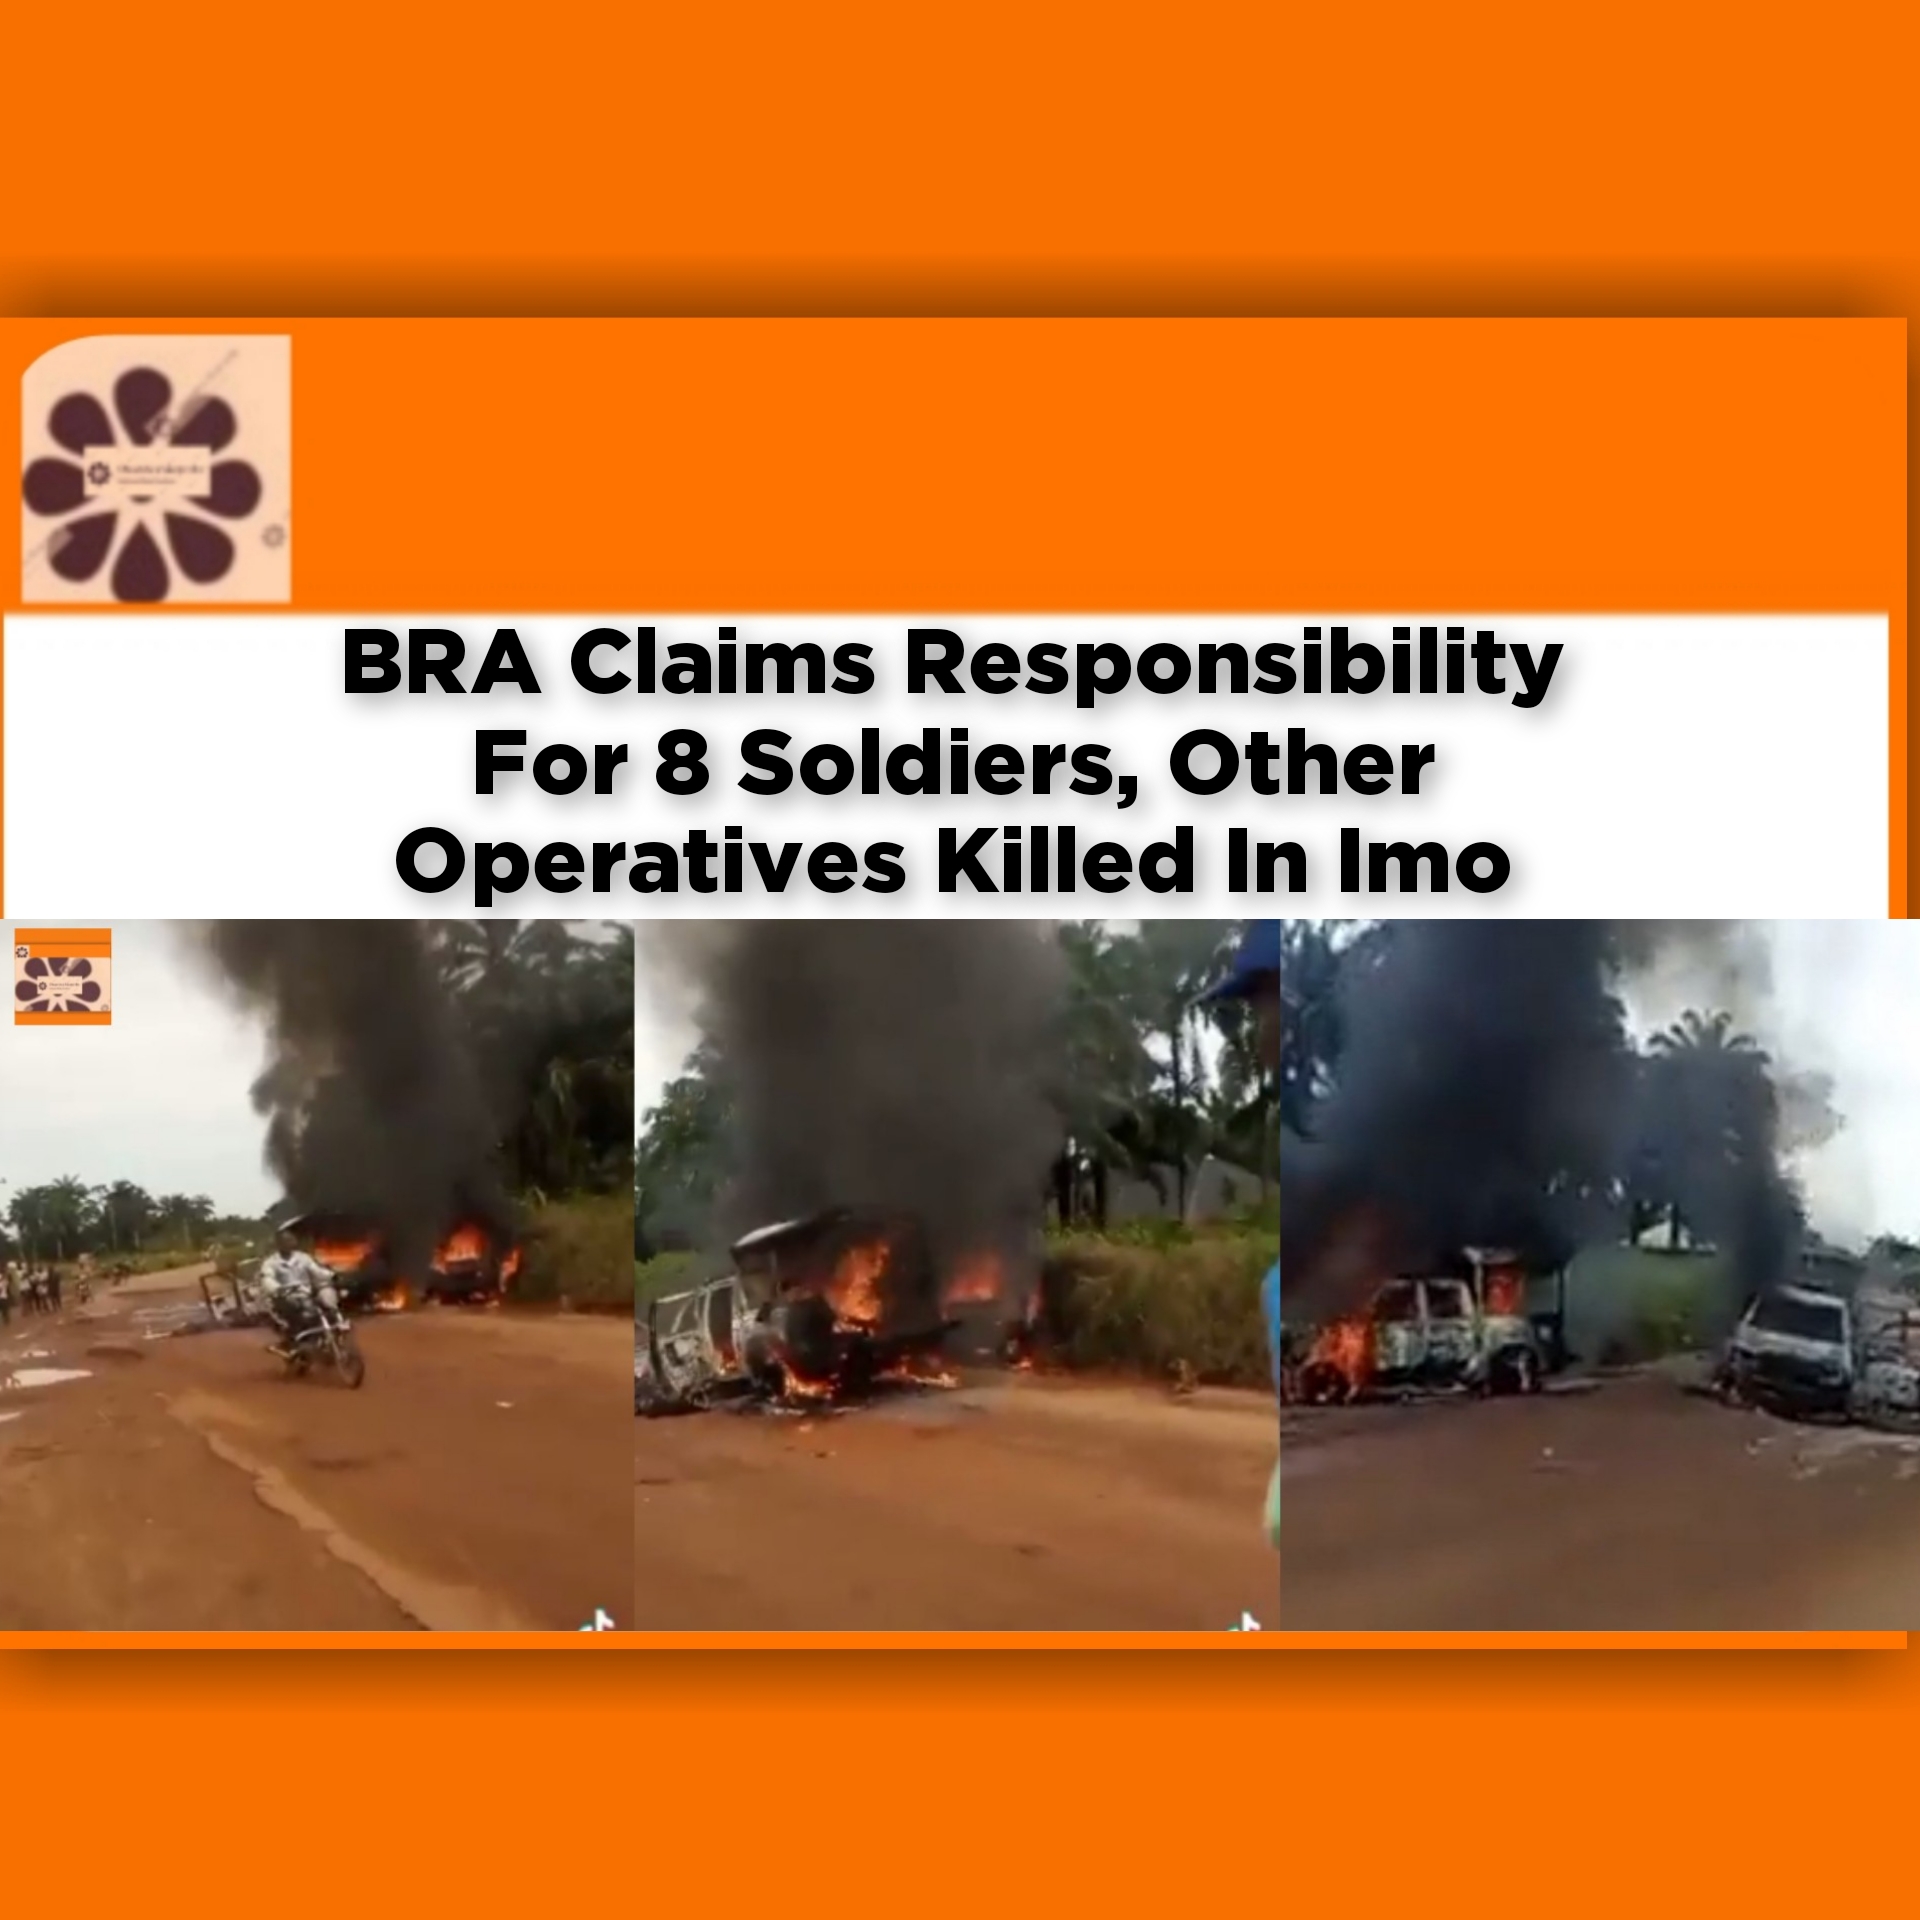 BRA Claims Responsibility For 8 Soldiers, Other Operatives Killed In Imo ~ OsazuwaAkonedo #Gabriel